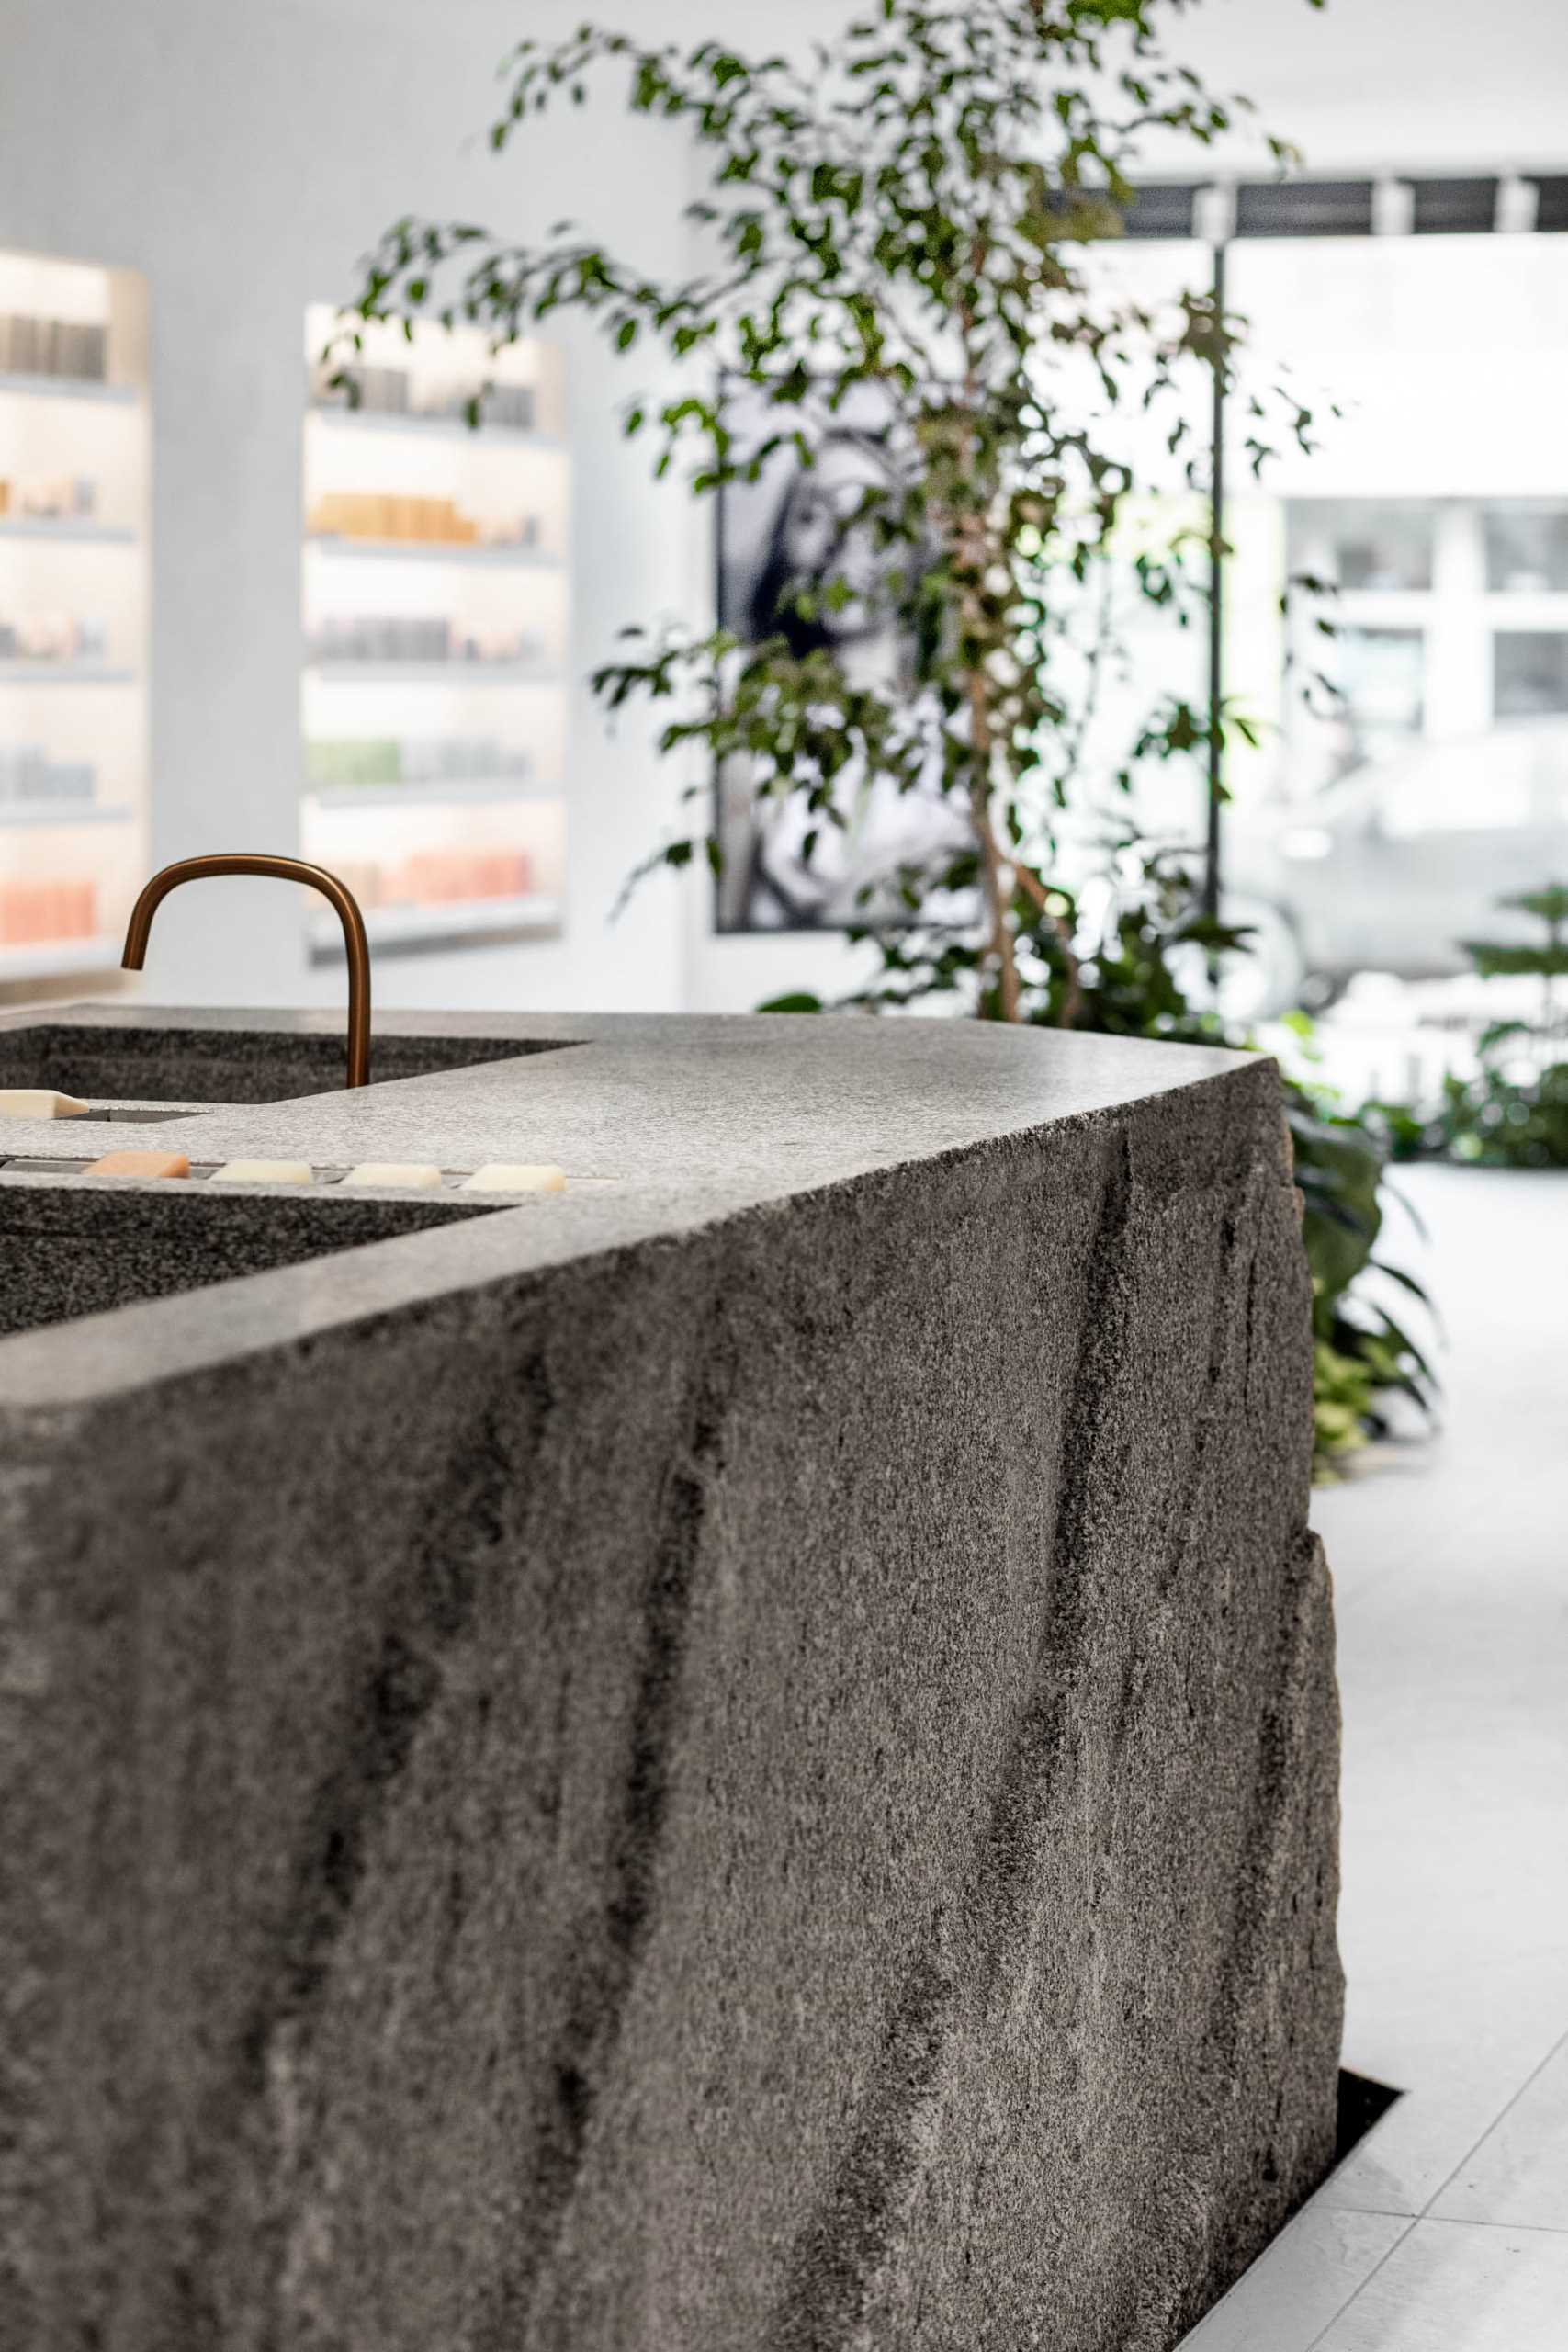 A modern retail store for a beauty brand includes a large boulder-like granite island with carved-out sinks.